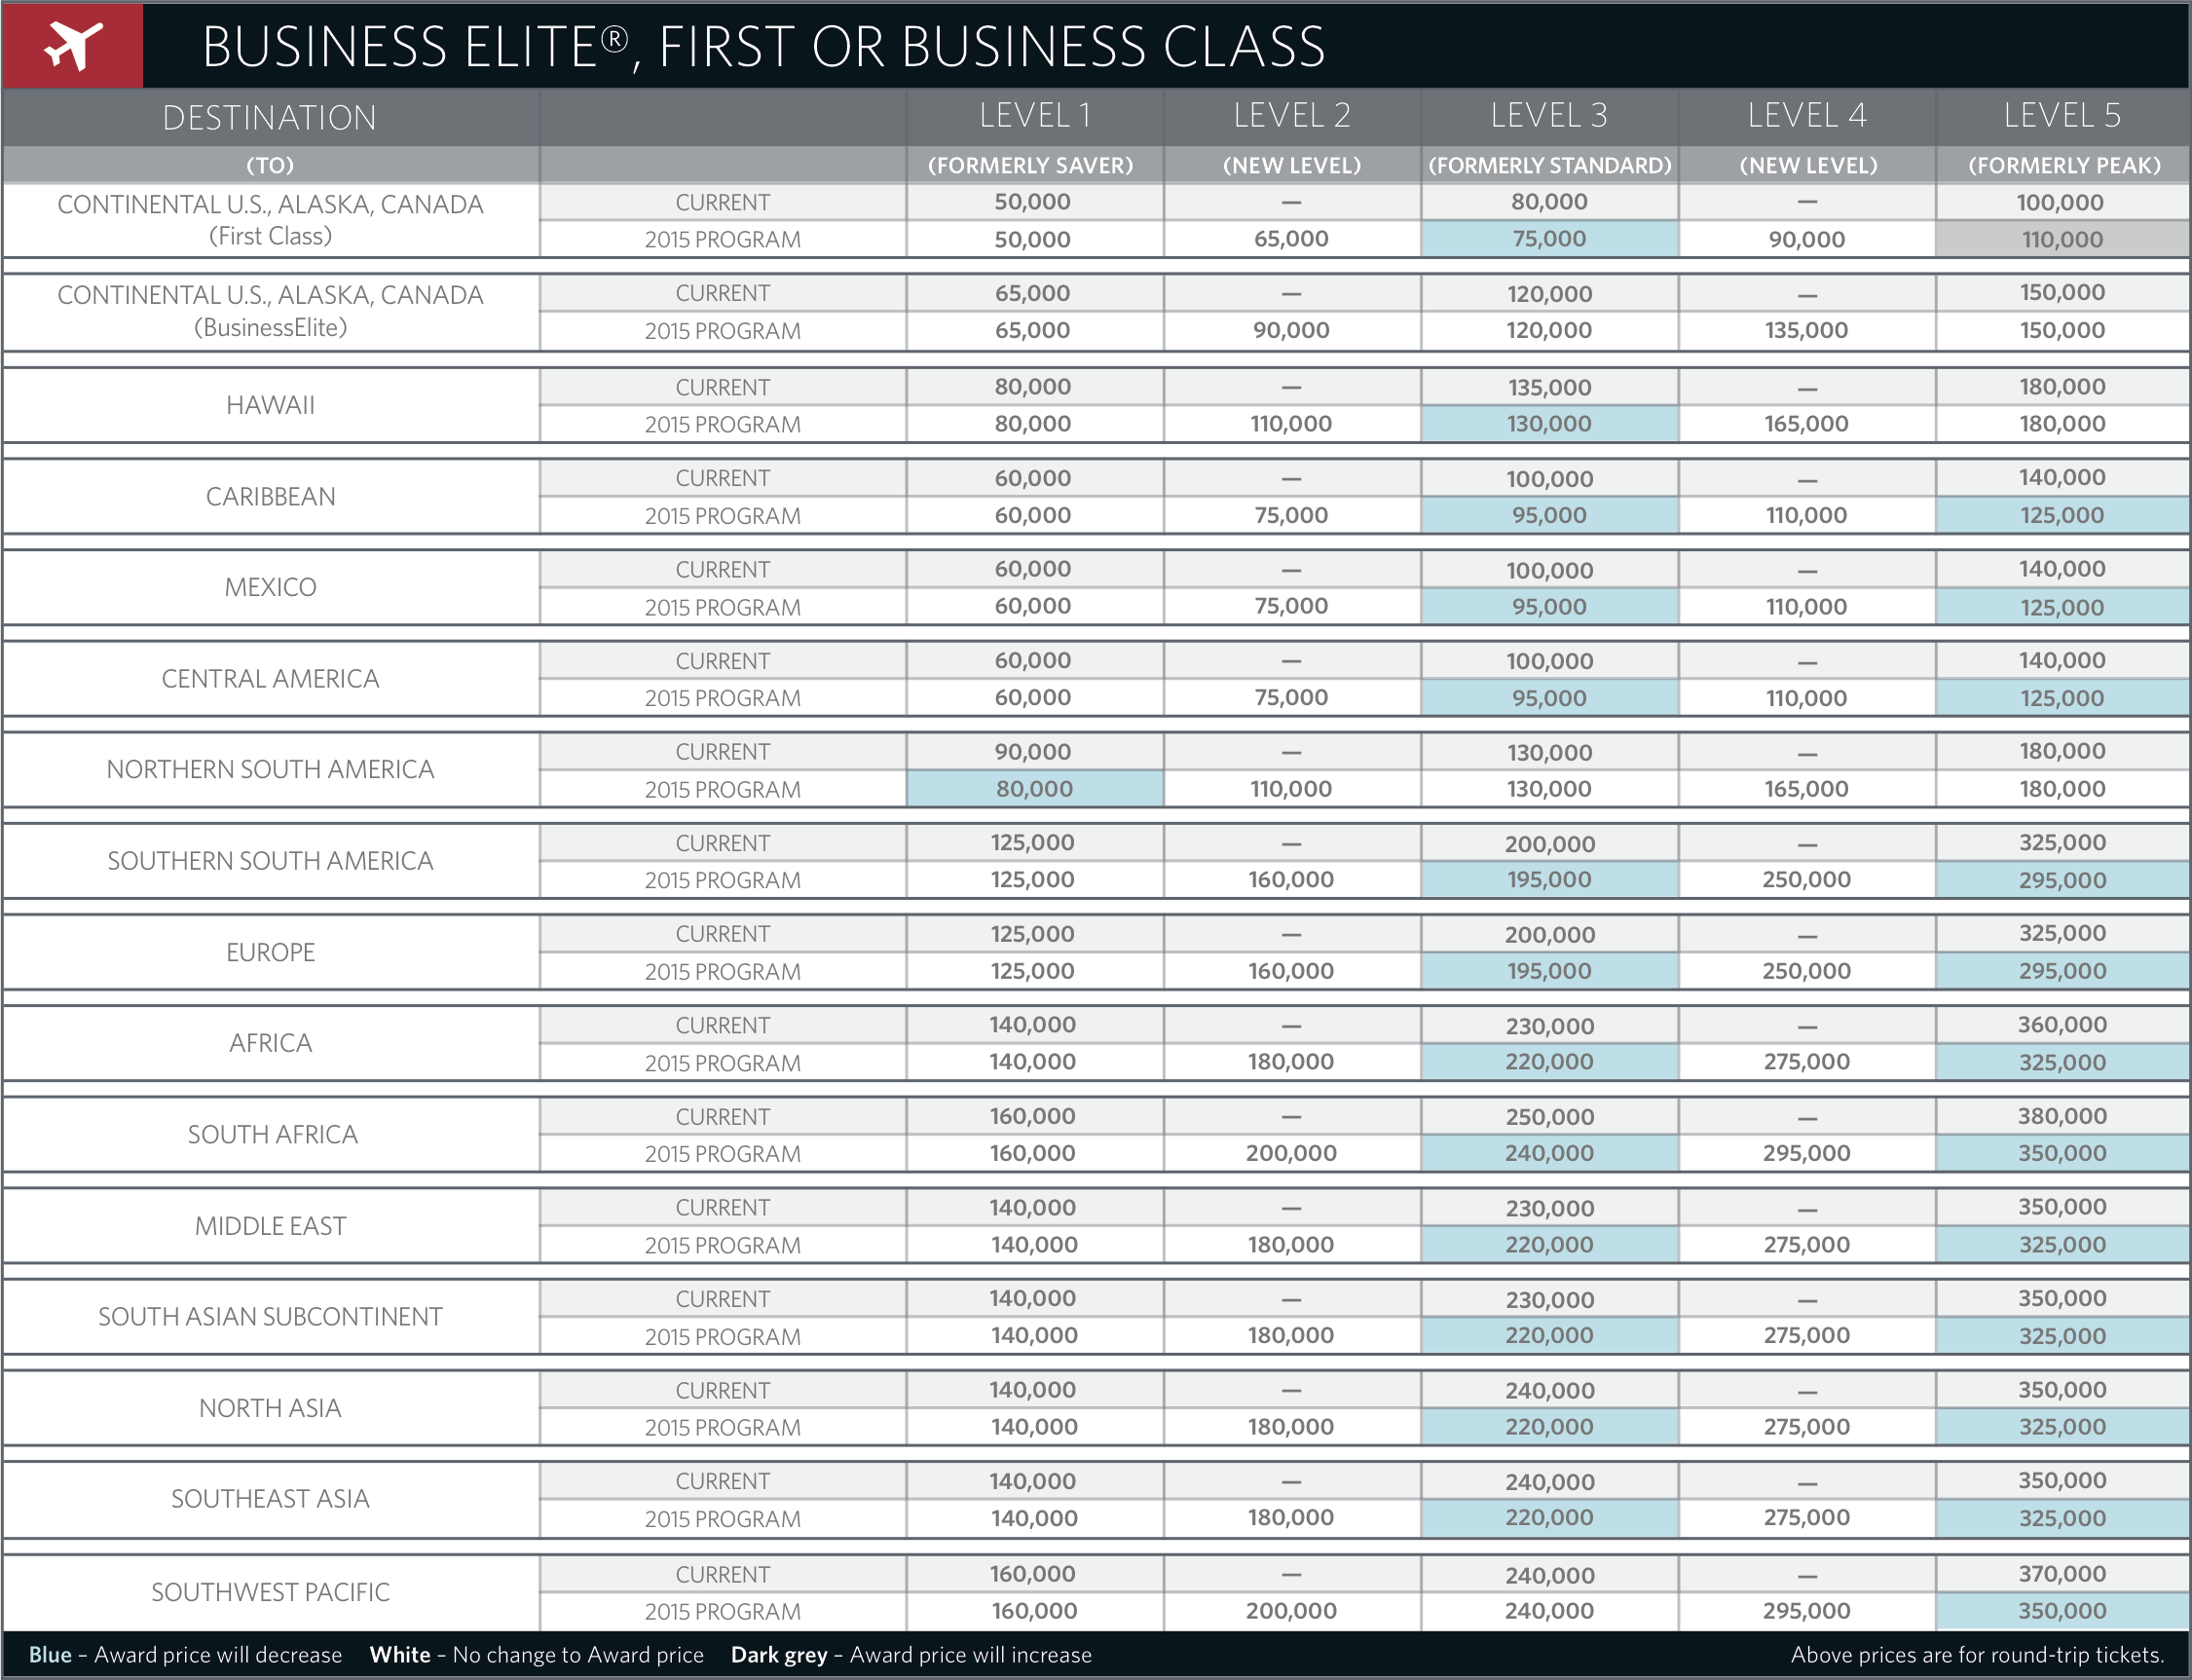 Click on the premium class SkyMiles award chart for an enlarged view. Source: Delta Air Lines.